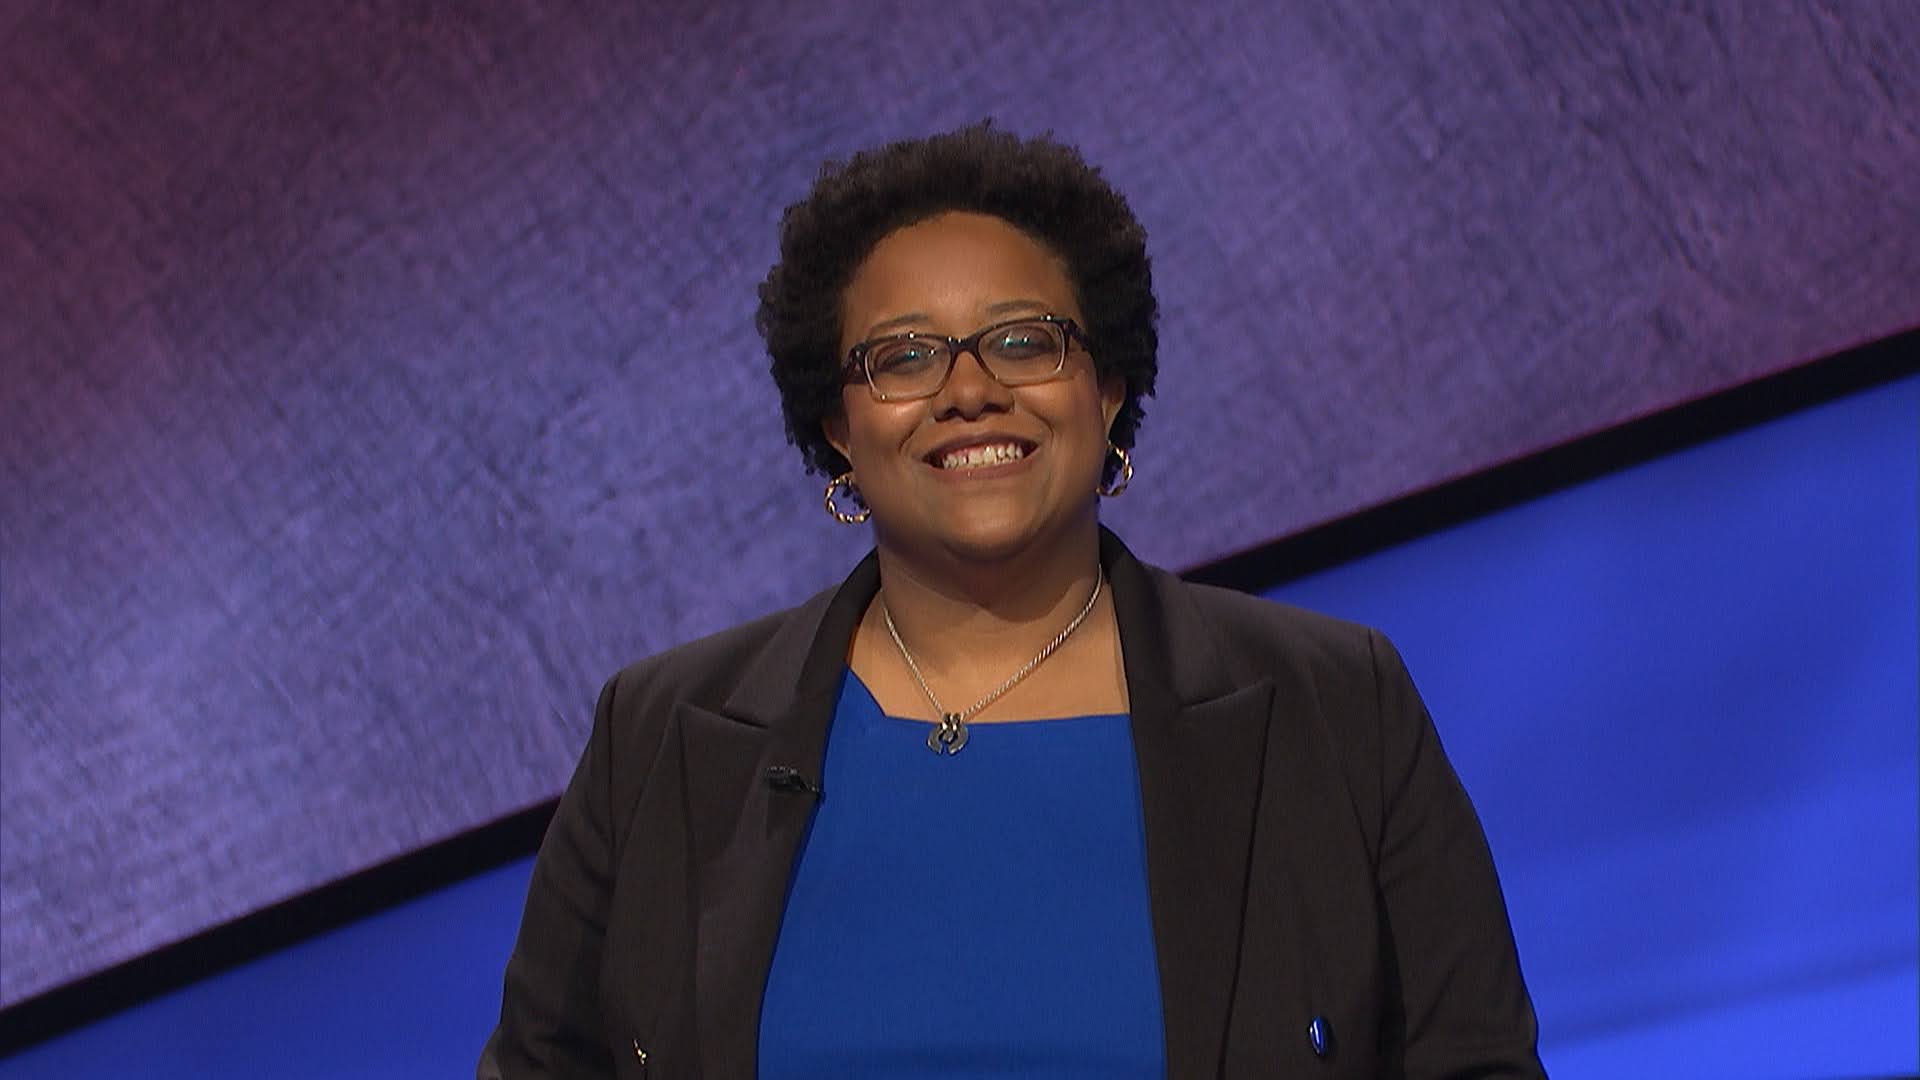 What Is Black Excellence? Former “Jeopardy!” Contestants Reflect On Competing While Black